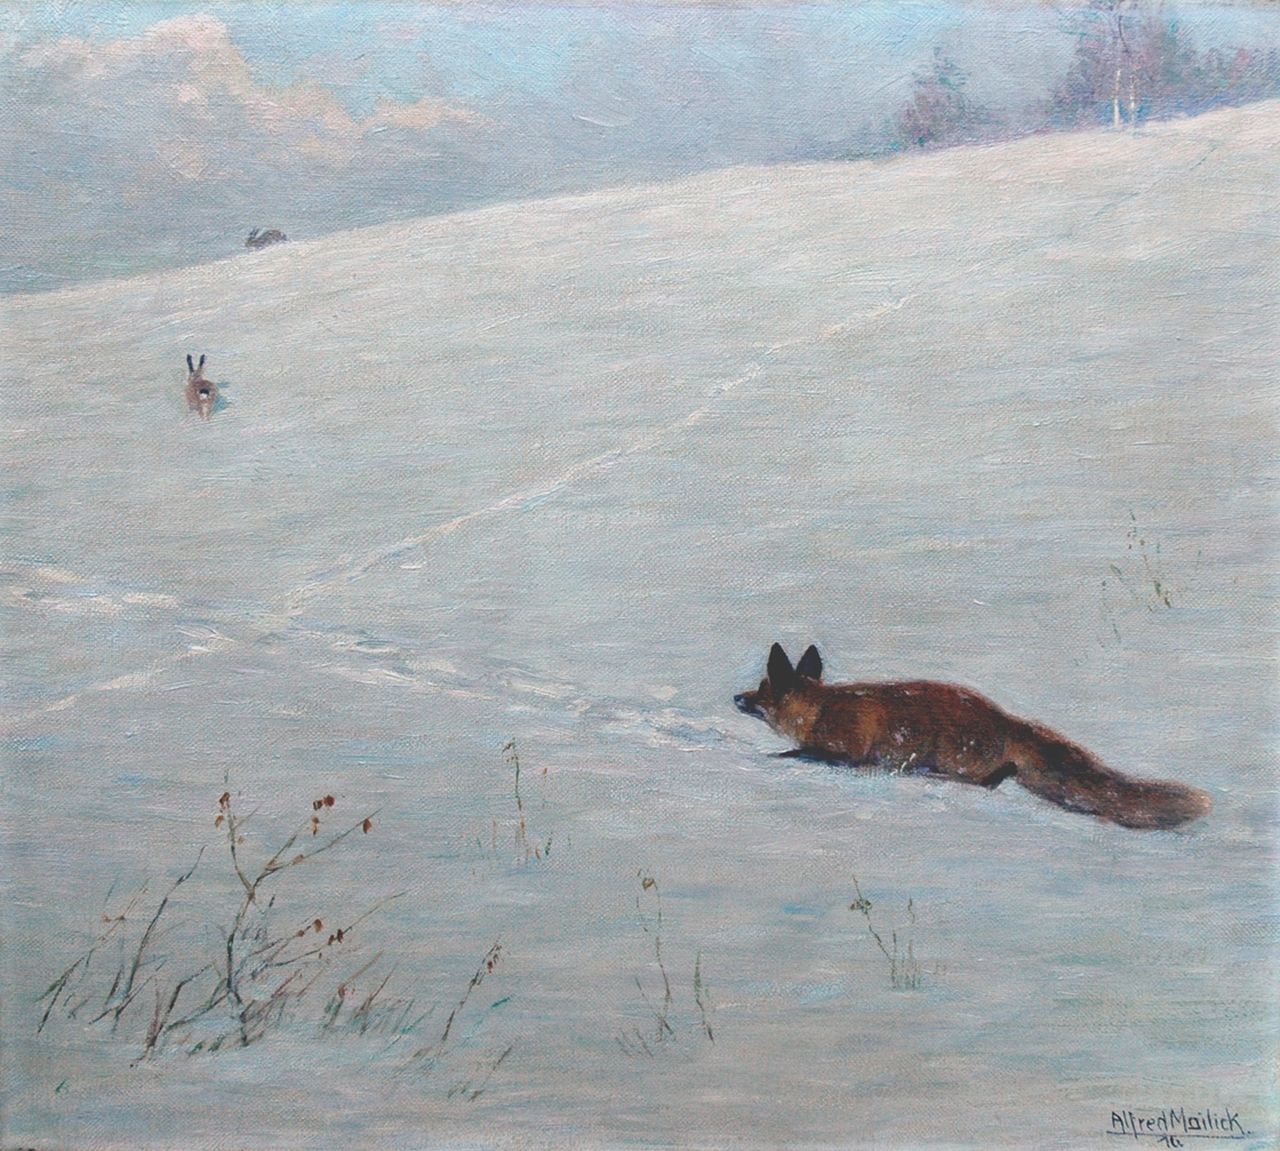 Mailick A.M.  | Alfred Moritz Mailick, Hunting in the snow, oil on canvas 41.1 x 46.2 cm, signed l.r. and dated '16